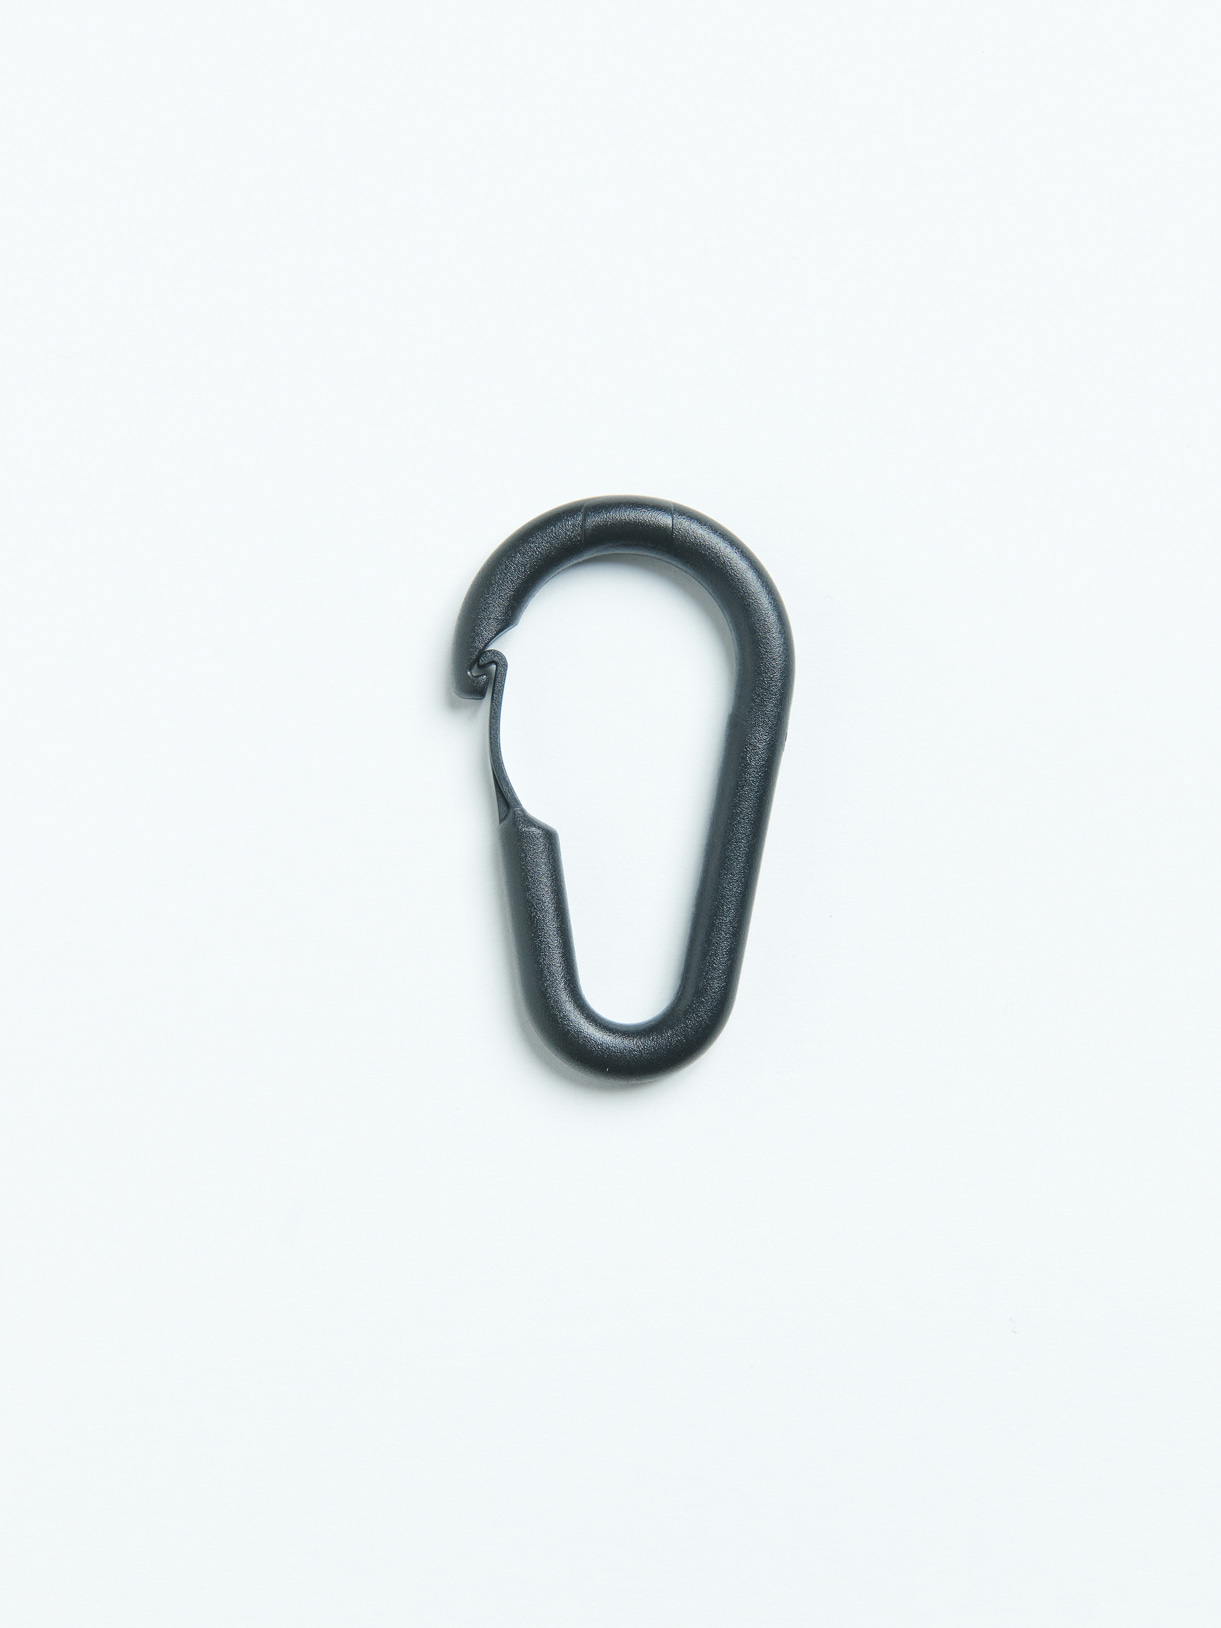 RECYCLED PLASTIC CARABINER